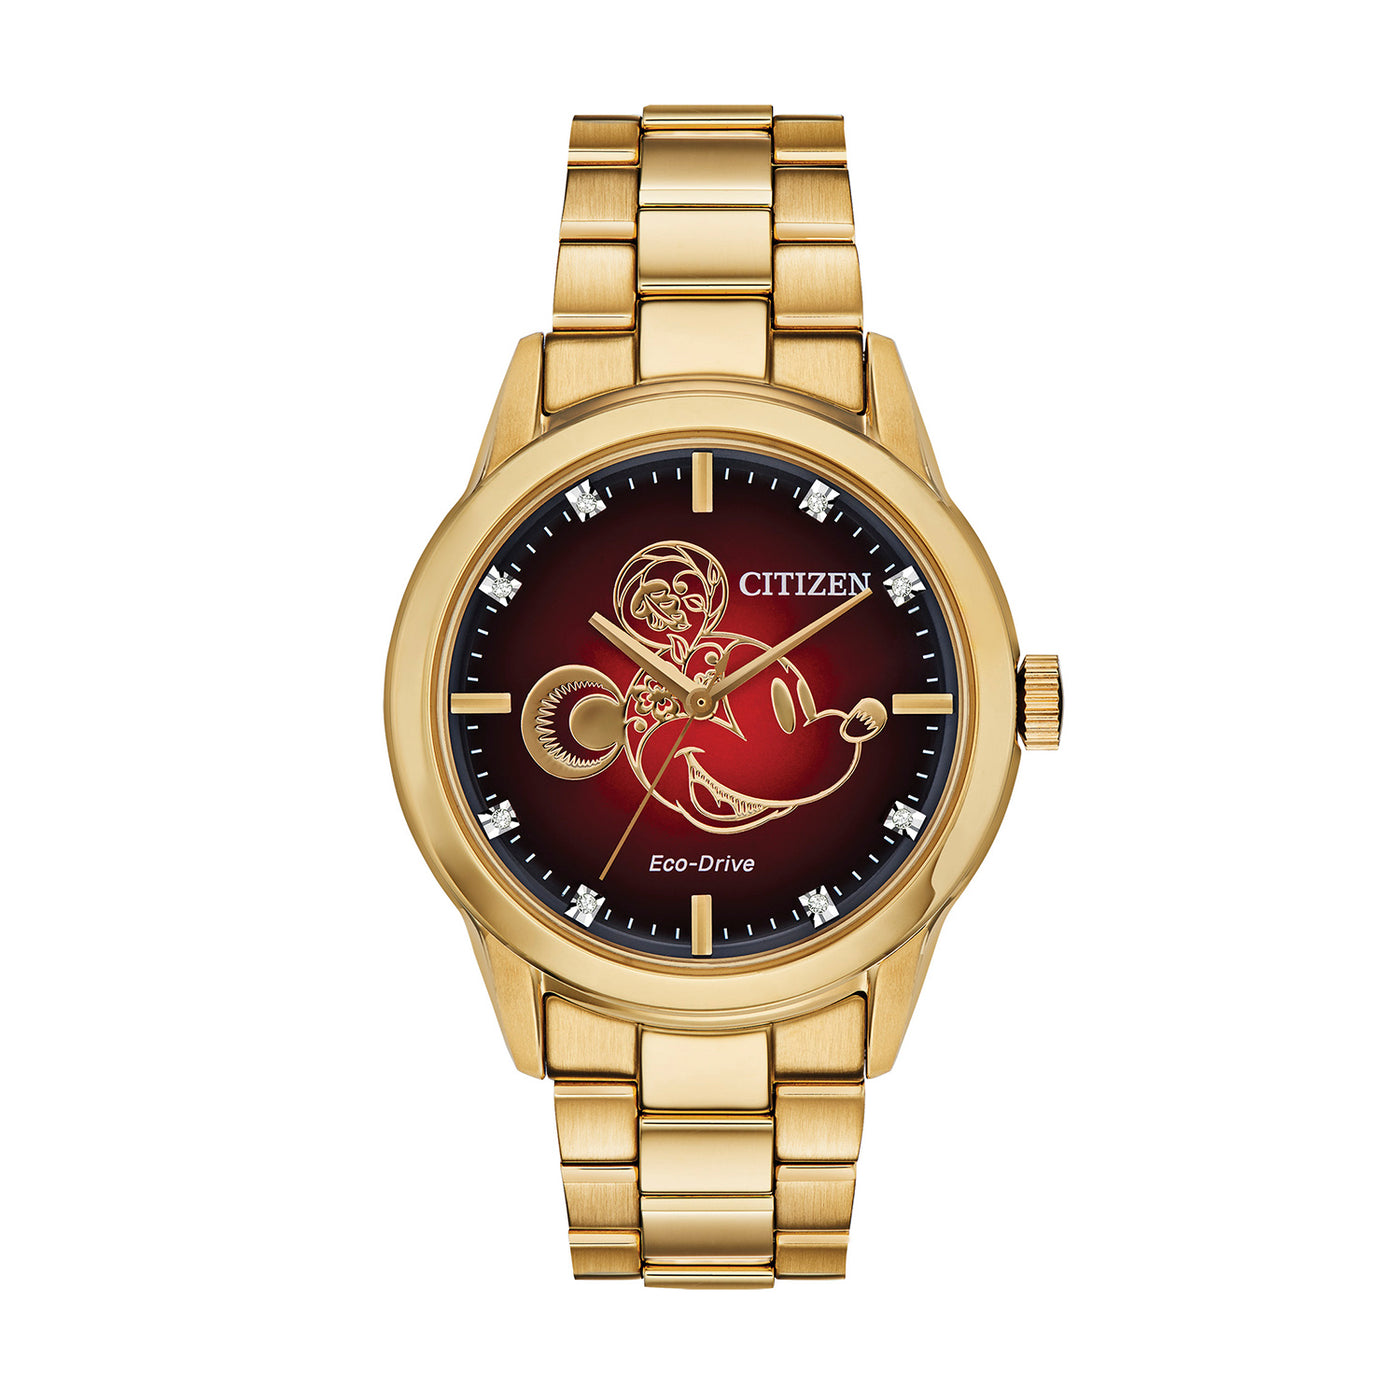 Citizen Disney "Year of the Mouse" Eco-Drive – FE7082-53W